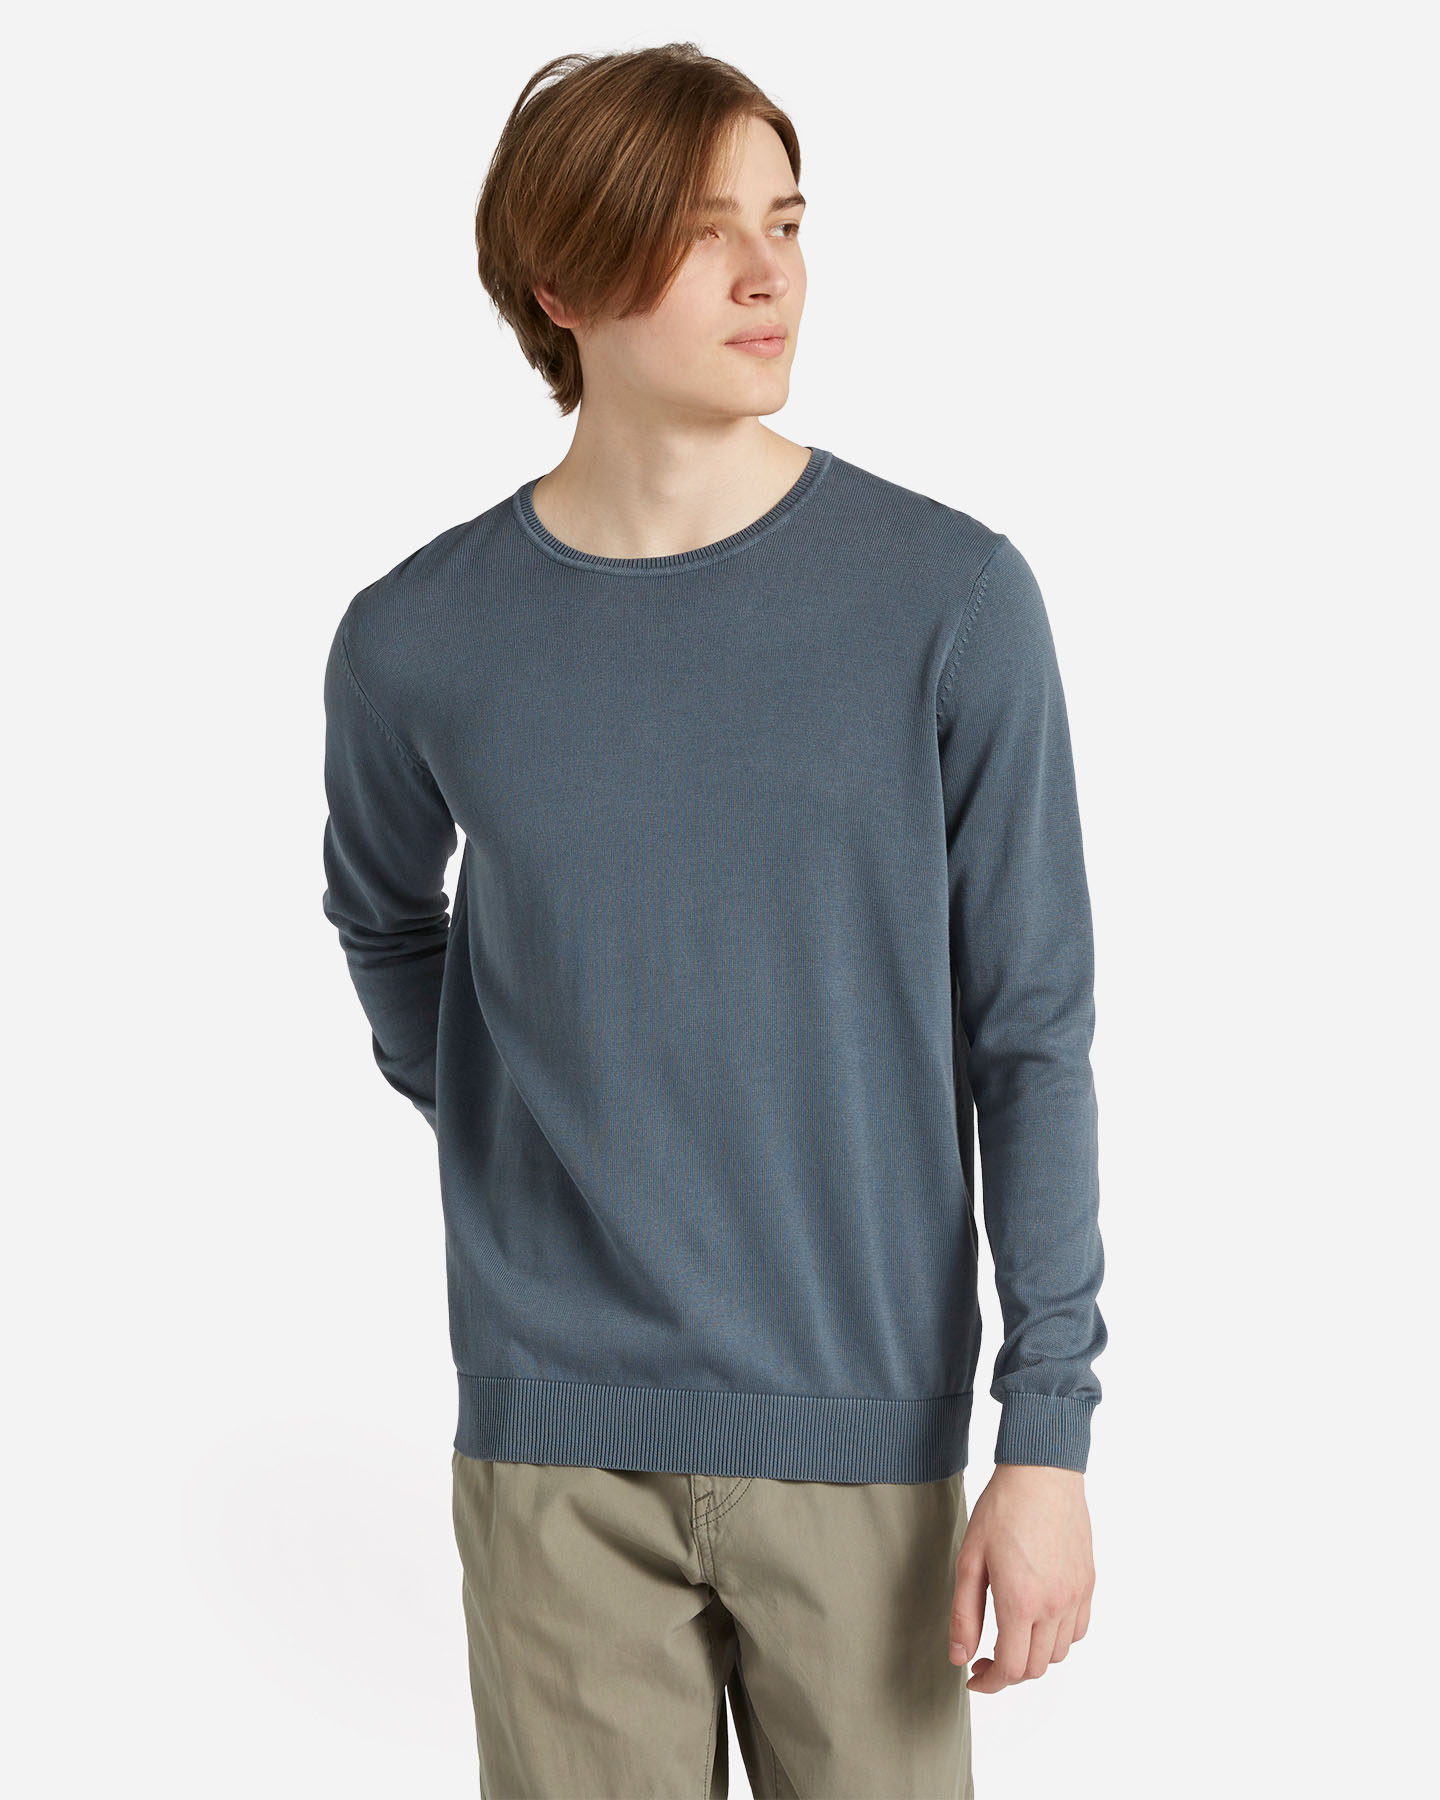 Image of Dack's Basic Collection M - Maglione - Uomo